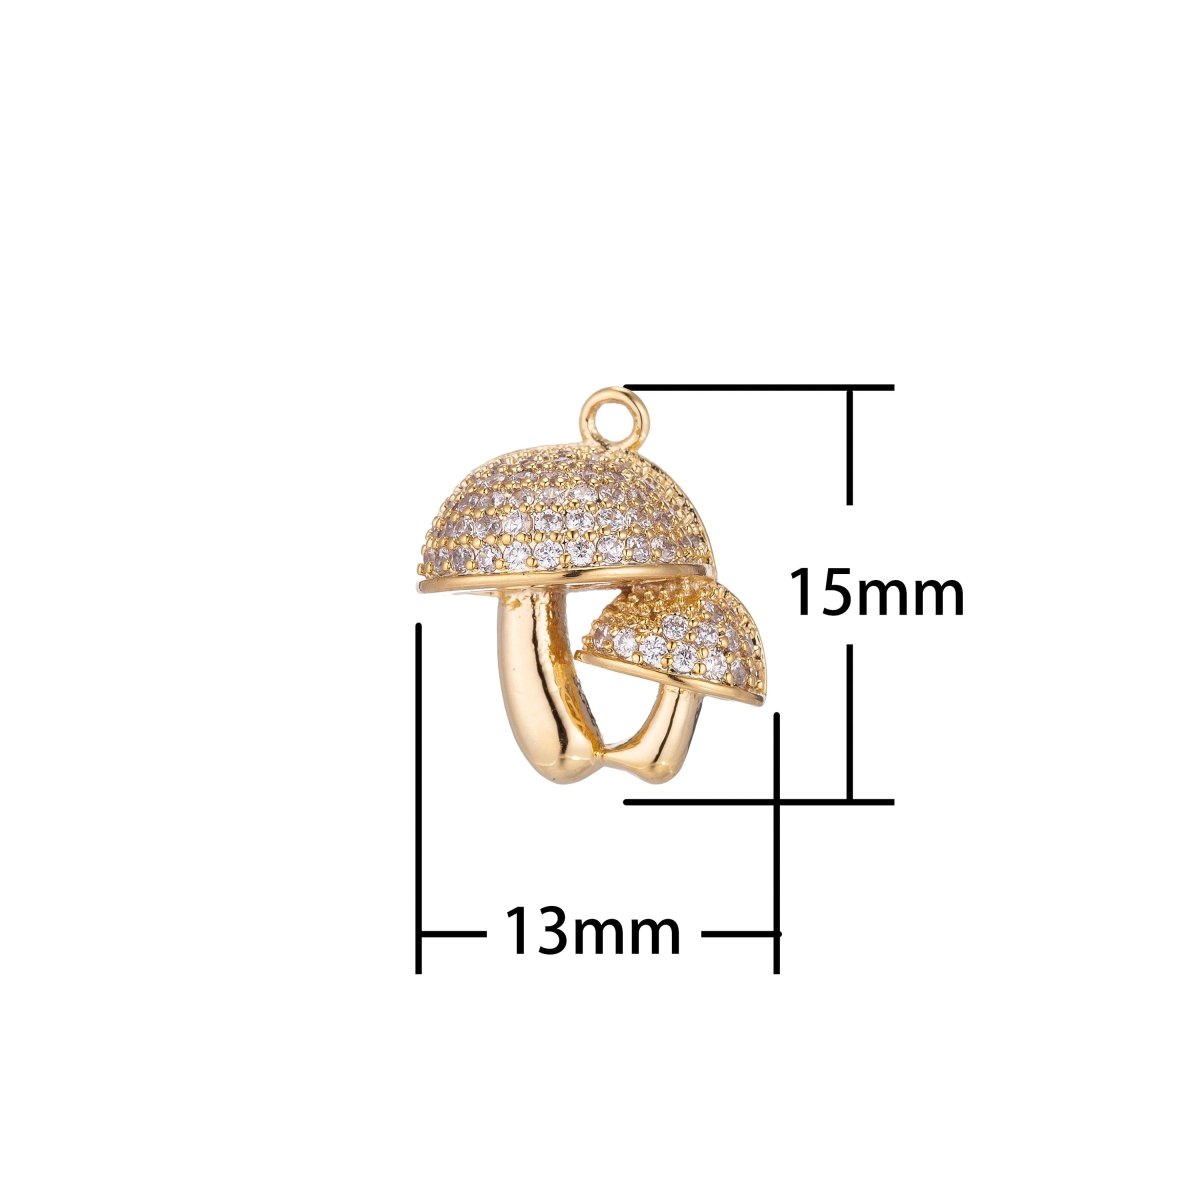 Cute Golden Mushrooms Charm, Micro Pave CZ Charm, Dainty Pendant Gold Mushroom Stick With You Love Necklace Charm for Jewelry Making E-425 - DLUXCA